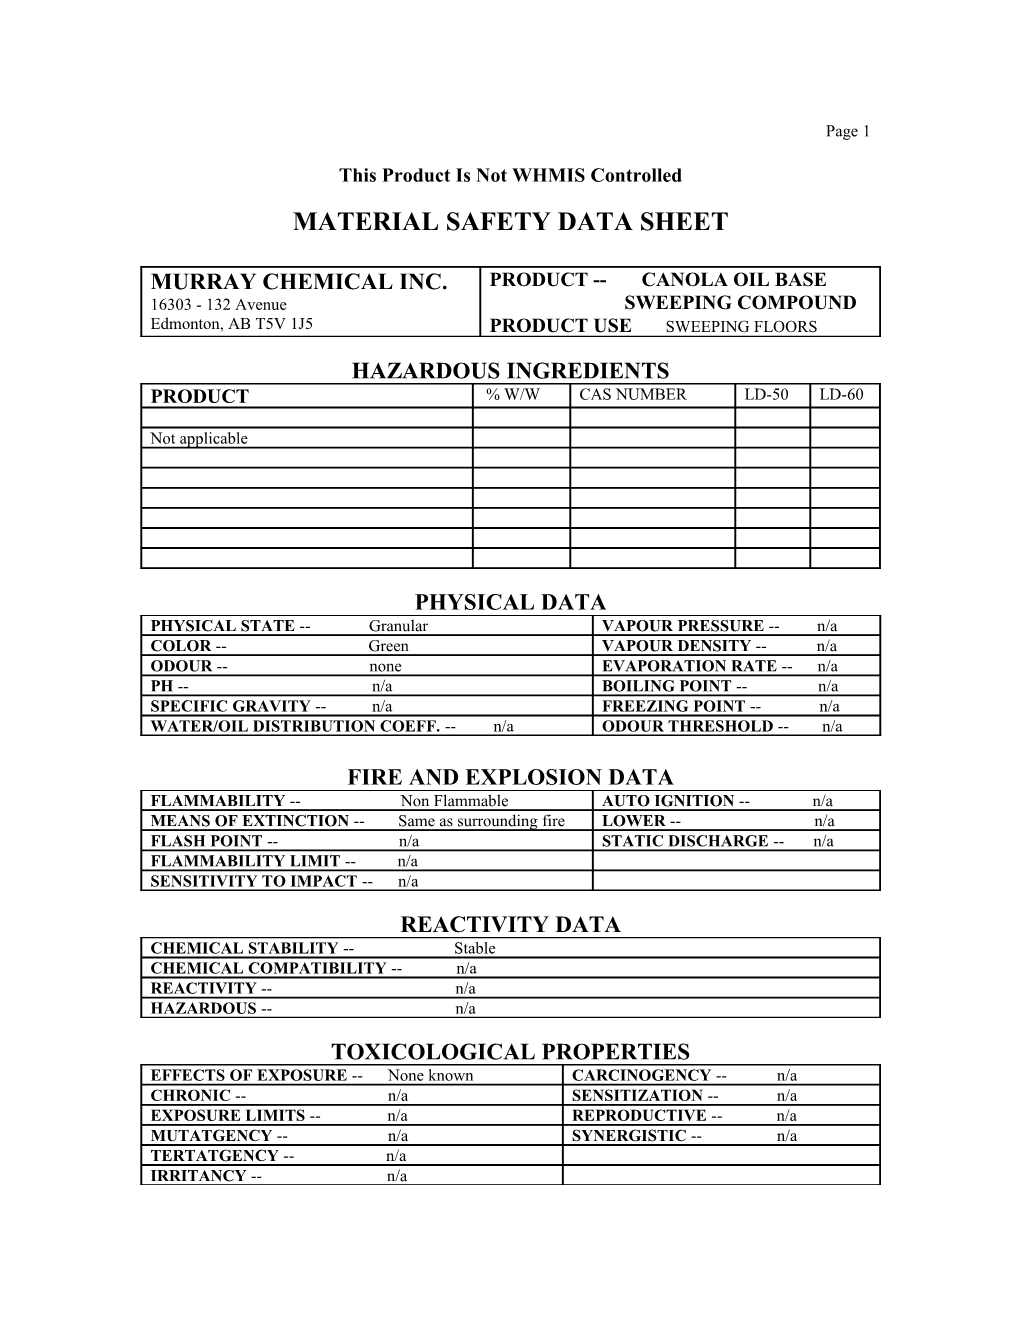 Material Safety Data Sheet s40